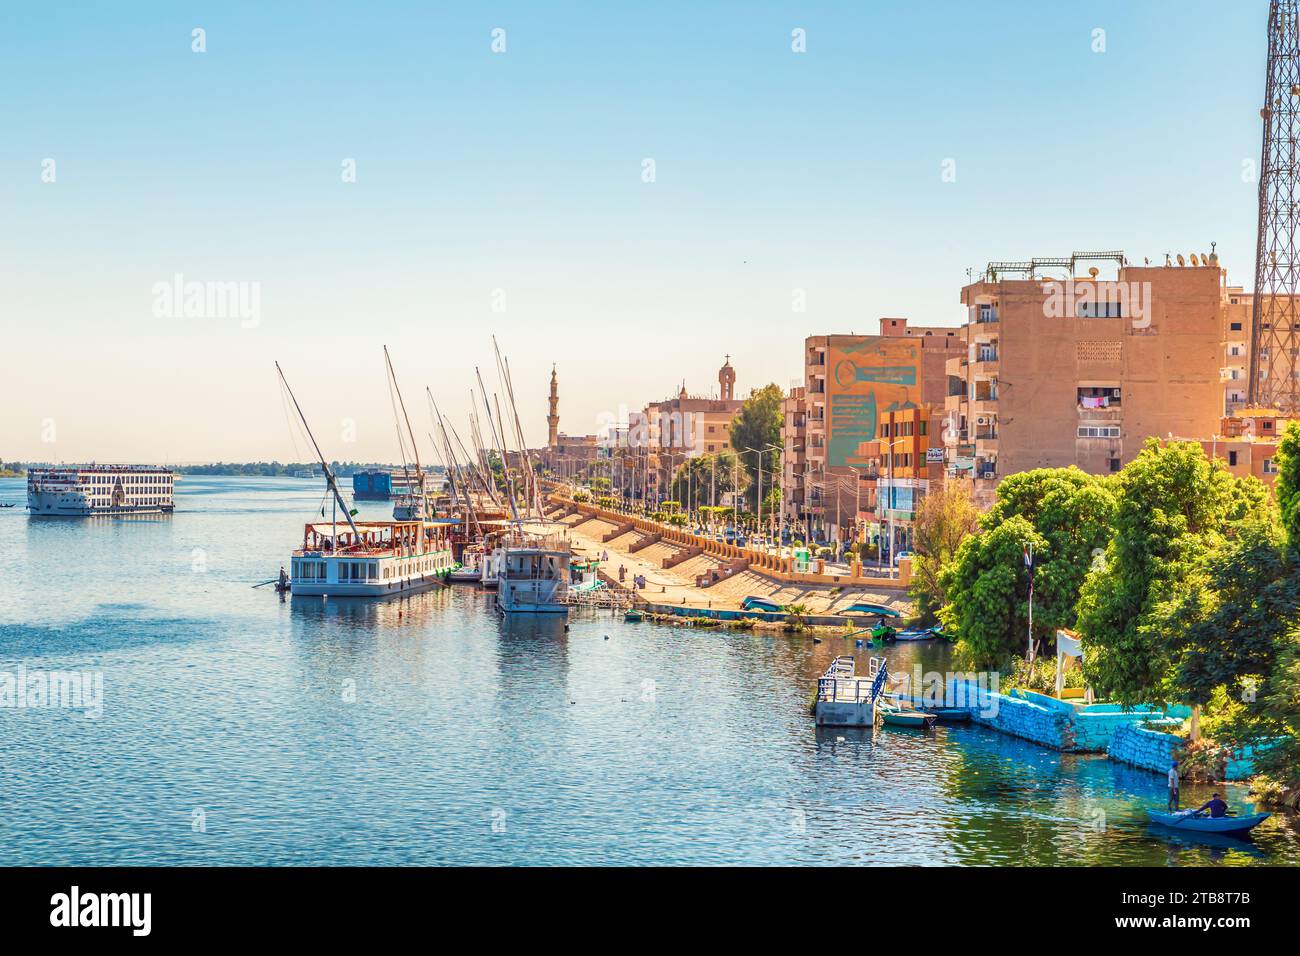 View of the Esna embankment from the Nile River. Esna, Egypt - October 20, 2023. Stock Photo